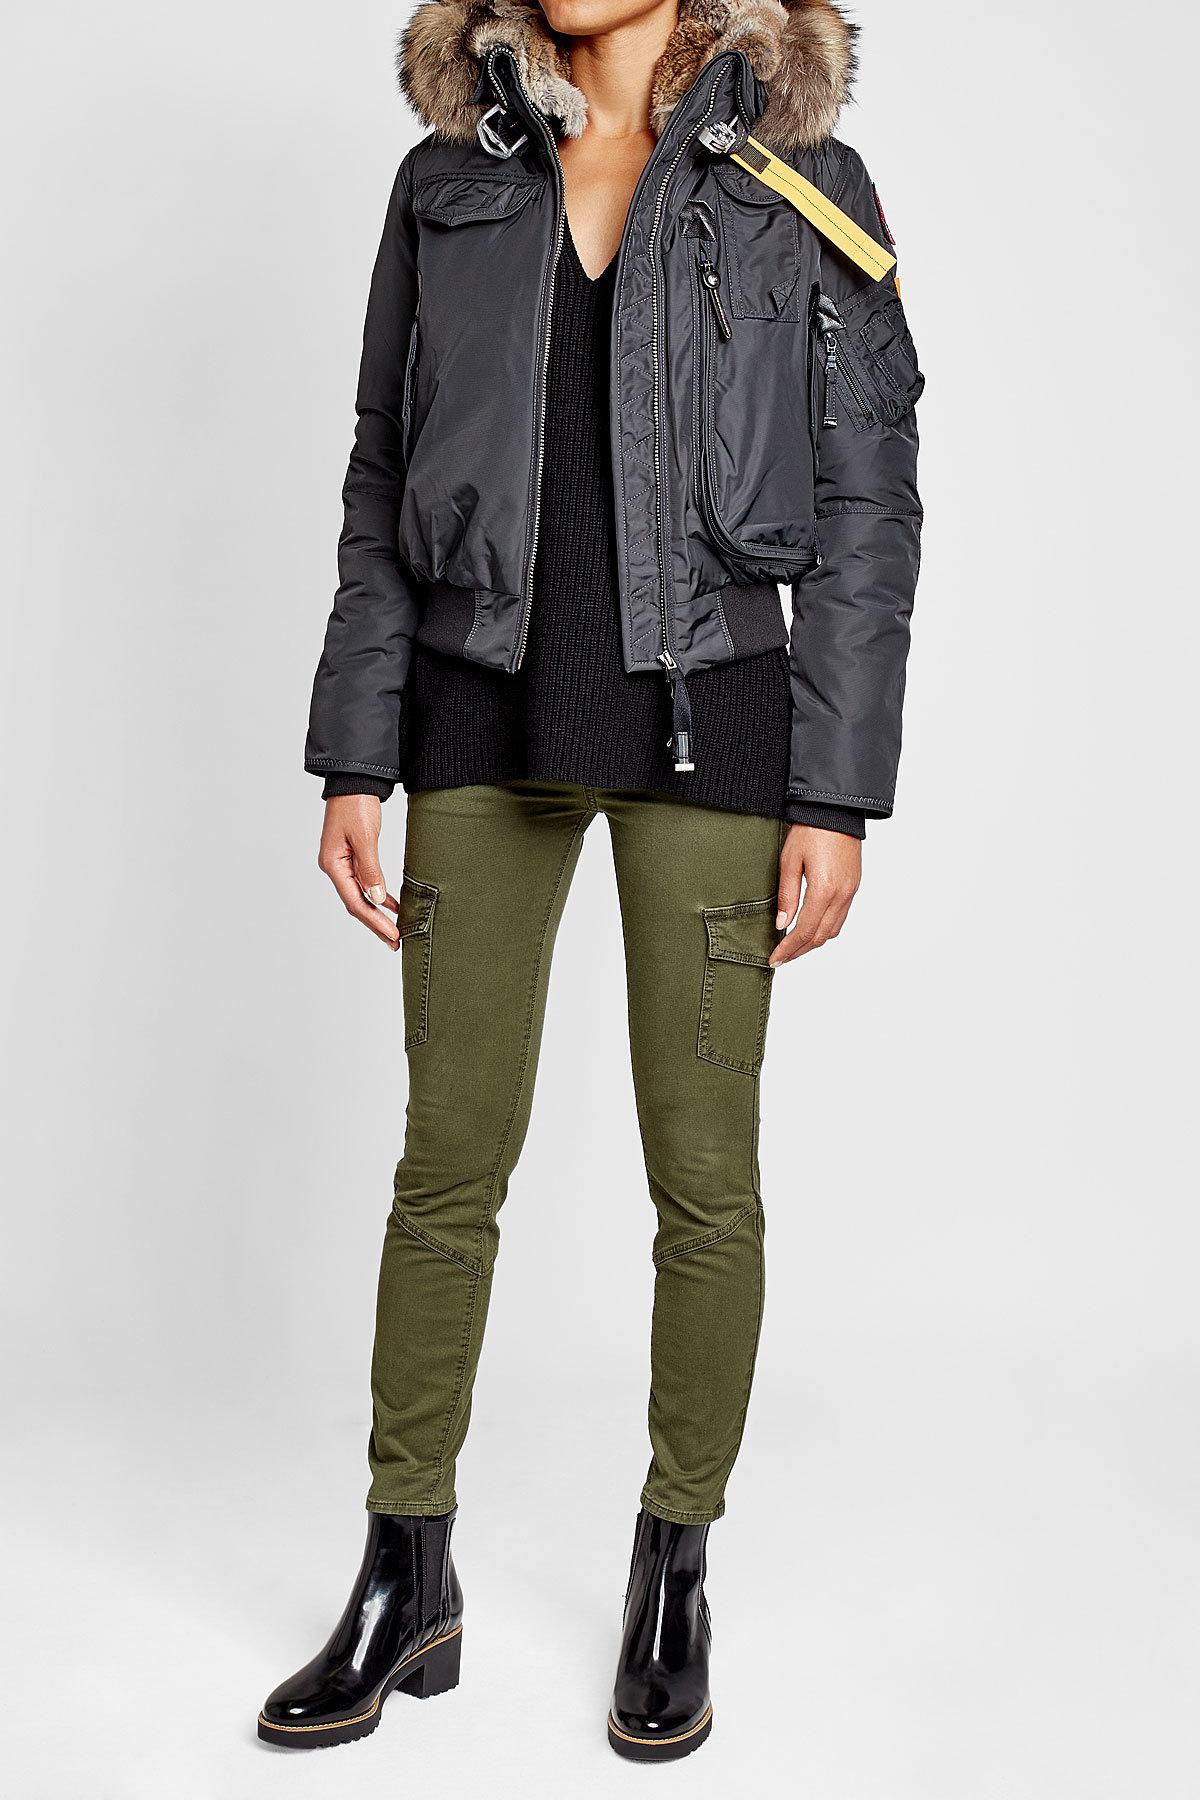 Lyst - Parajumpers Gobi Down Bomber Jacket With Fur Trimmed Hood